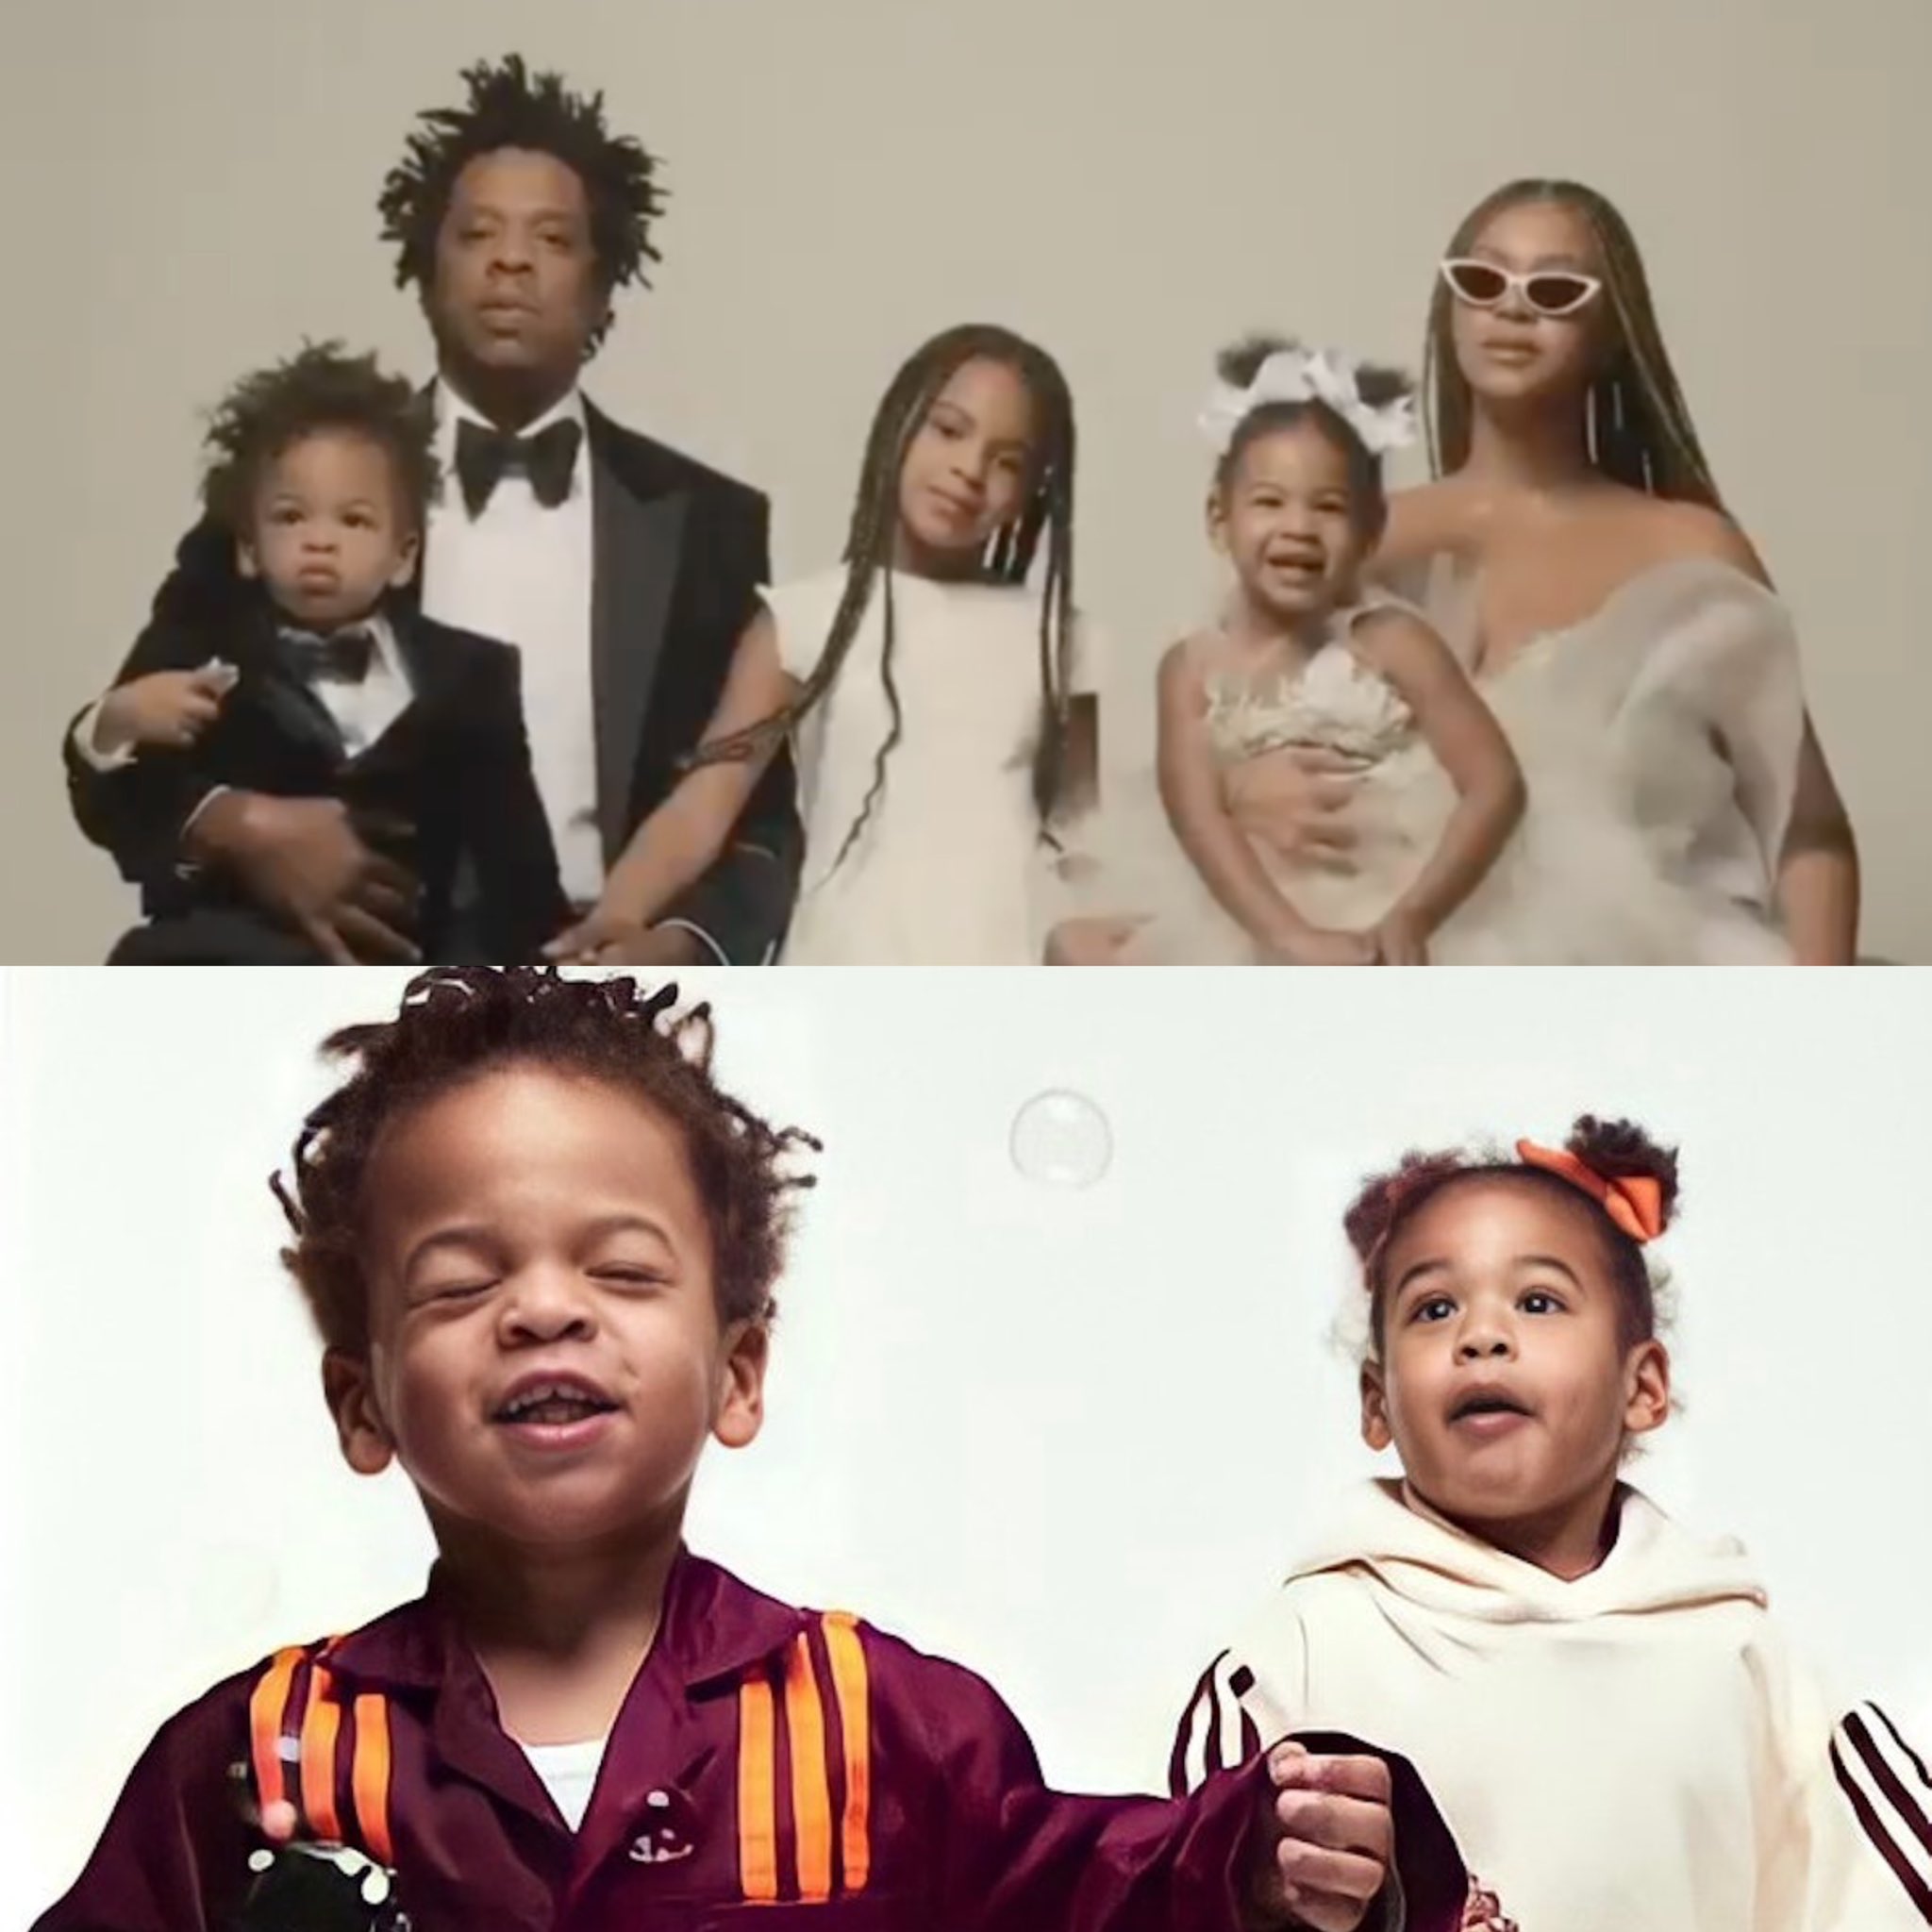 Pop Tingz on X: "Happy 6th birthday to Beyoncé and Jay-Z's adorable twins, Sir and Rumi Carter❤️🎂 https://t.co/BfzbUE0hSU" / X